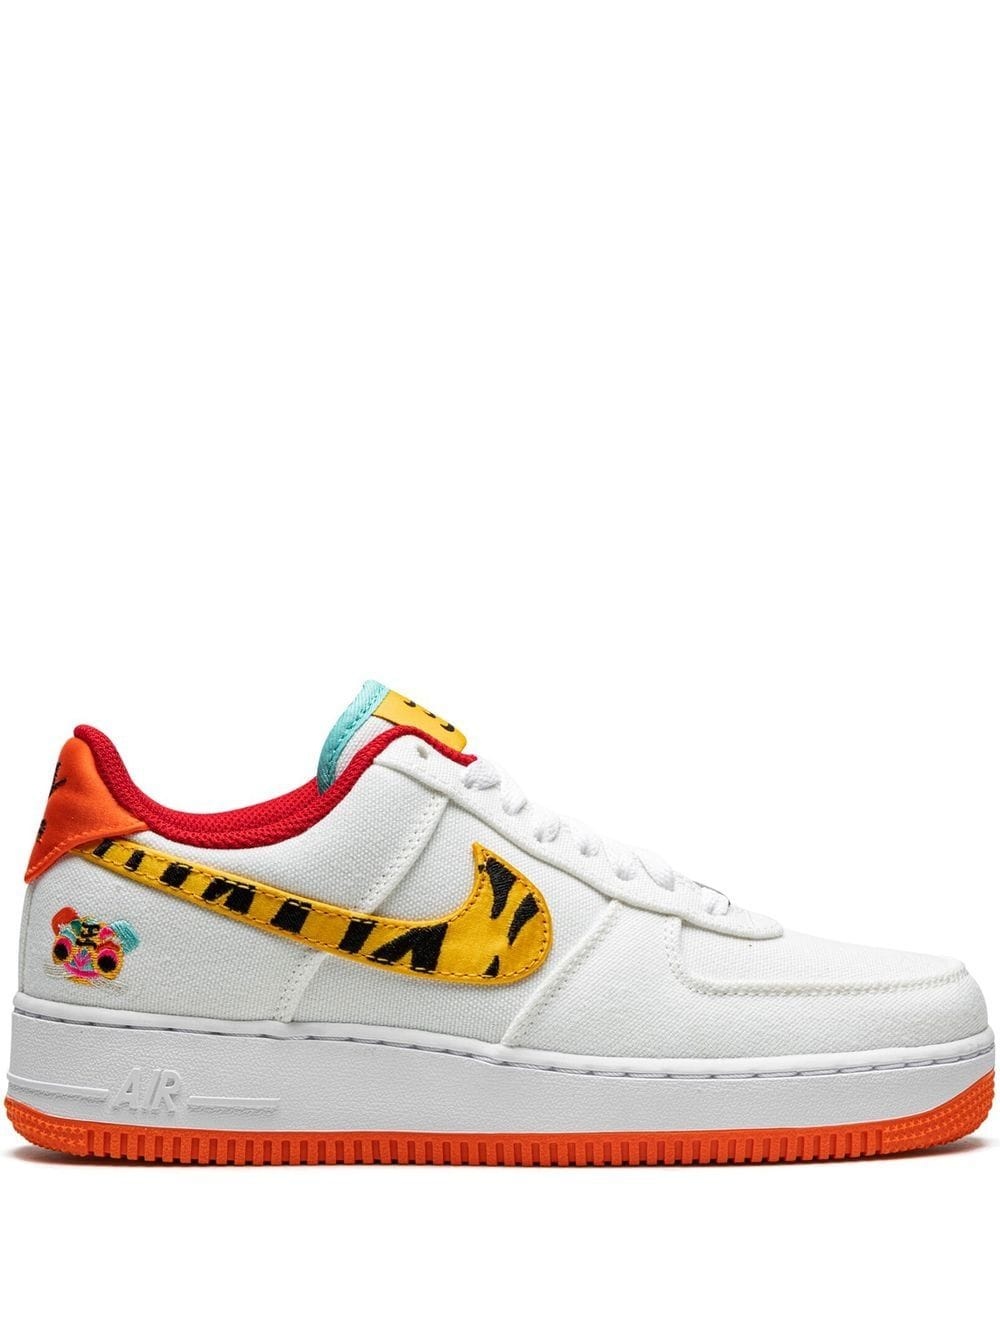 Air Force 1 '07 LX "Year of the Tiger" sneakers - 1